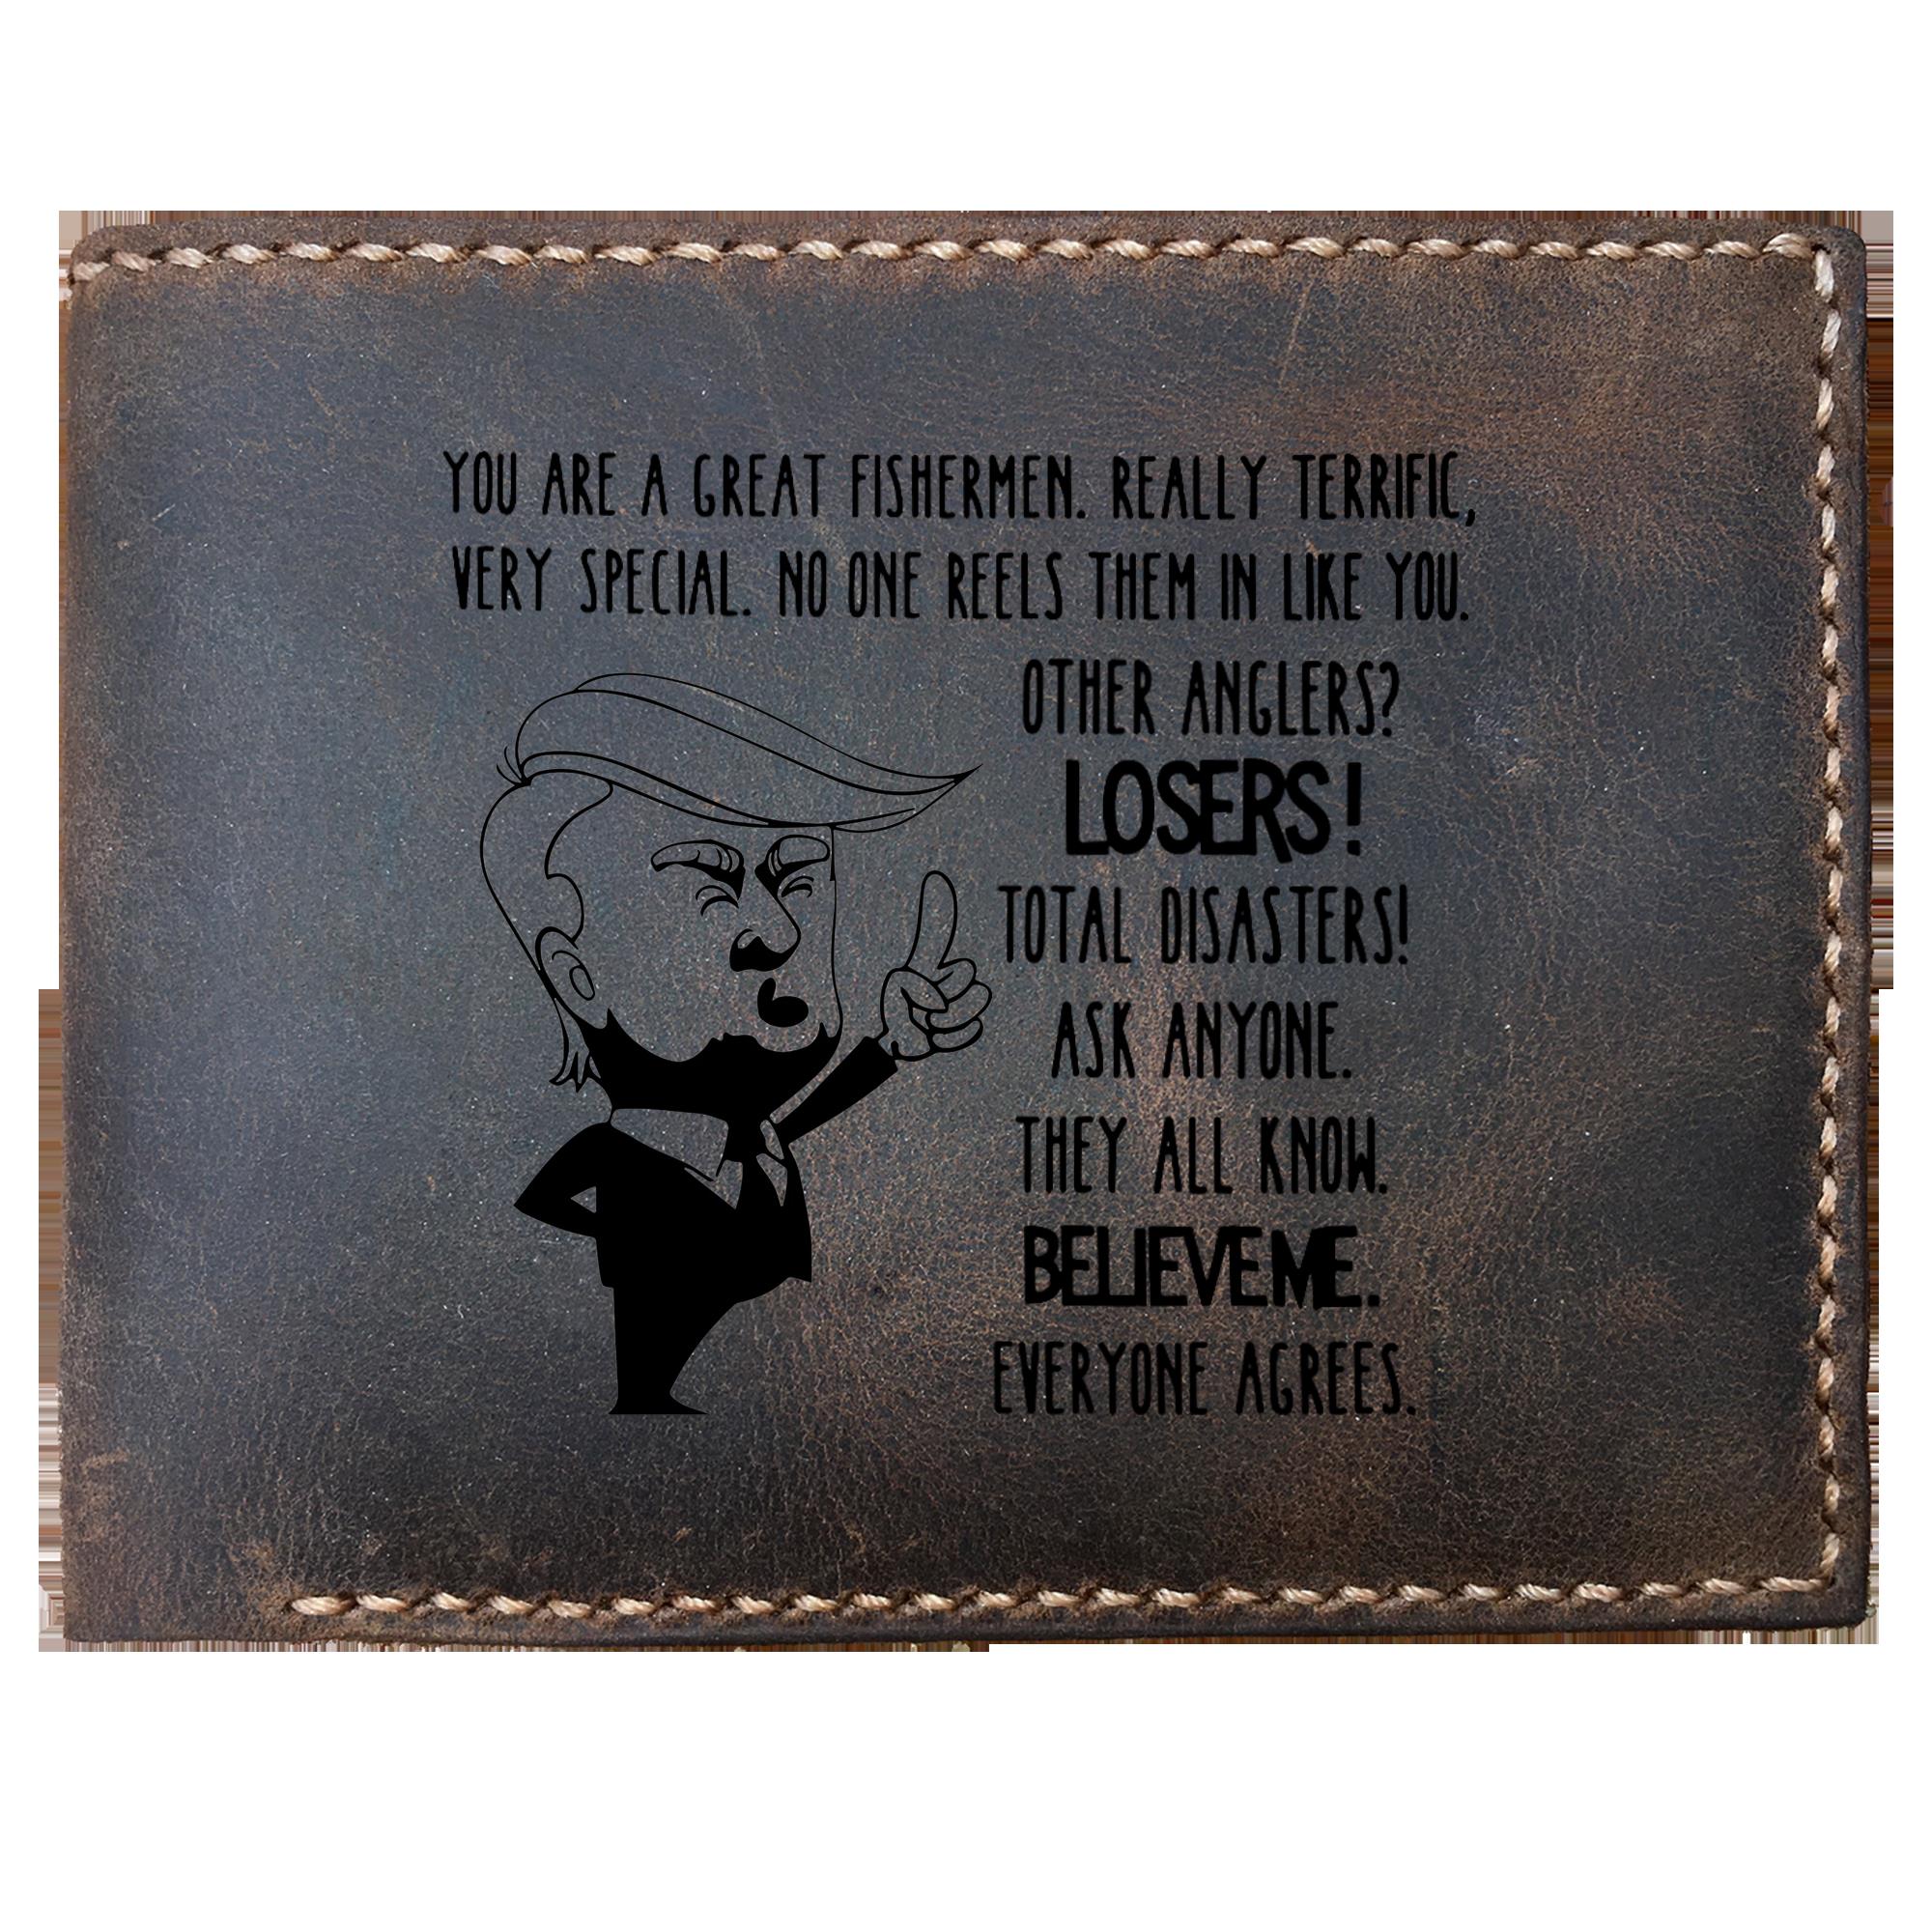 Skitongifts Funny Custom Laser Engraved Bifold Leather Wallet For Men, Trump For Great Fishermen For Angler Fly Fishing Lover